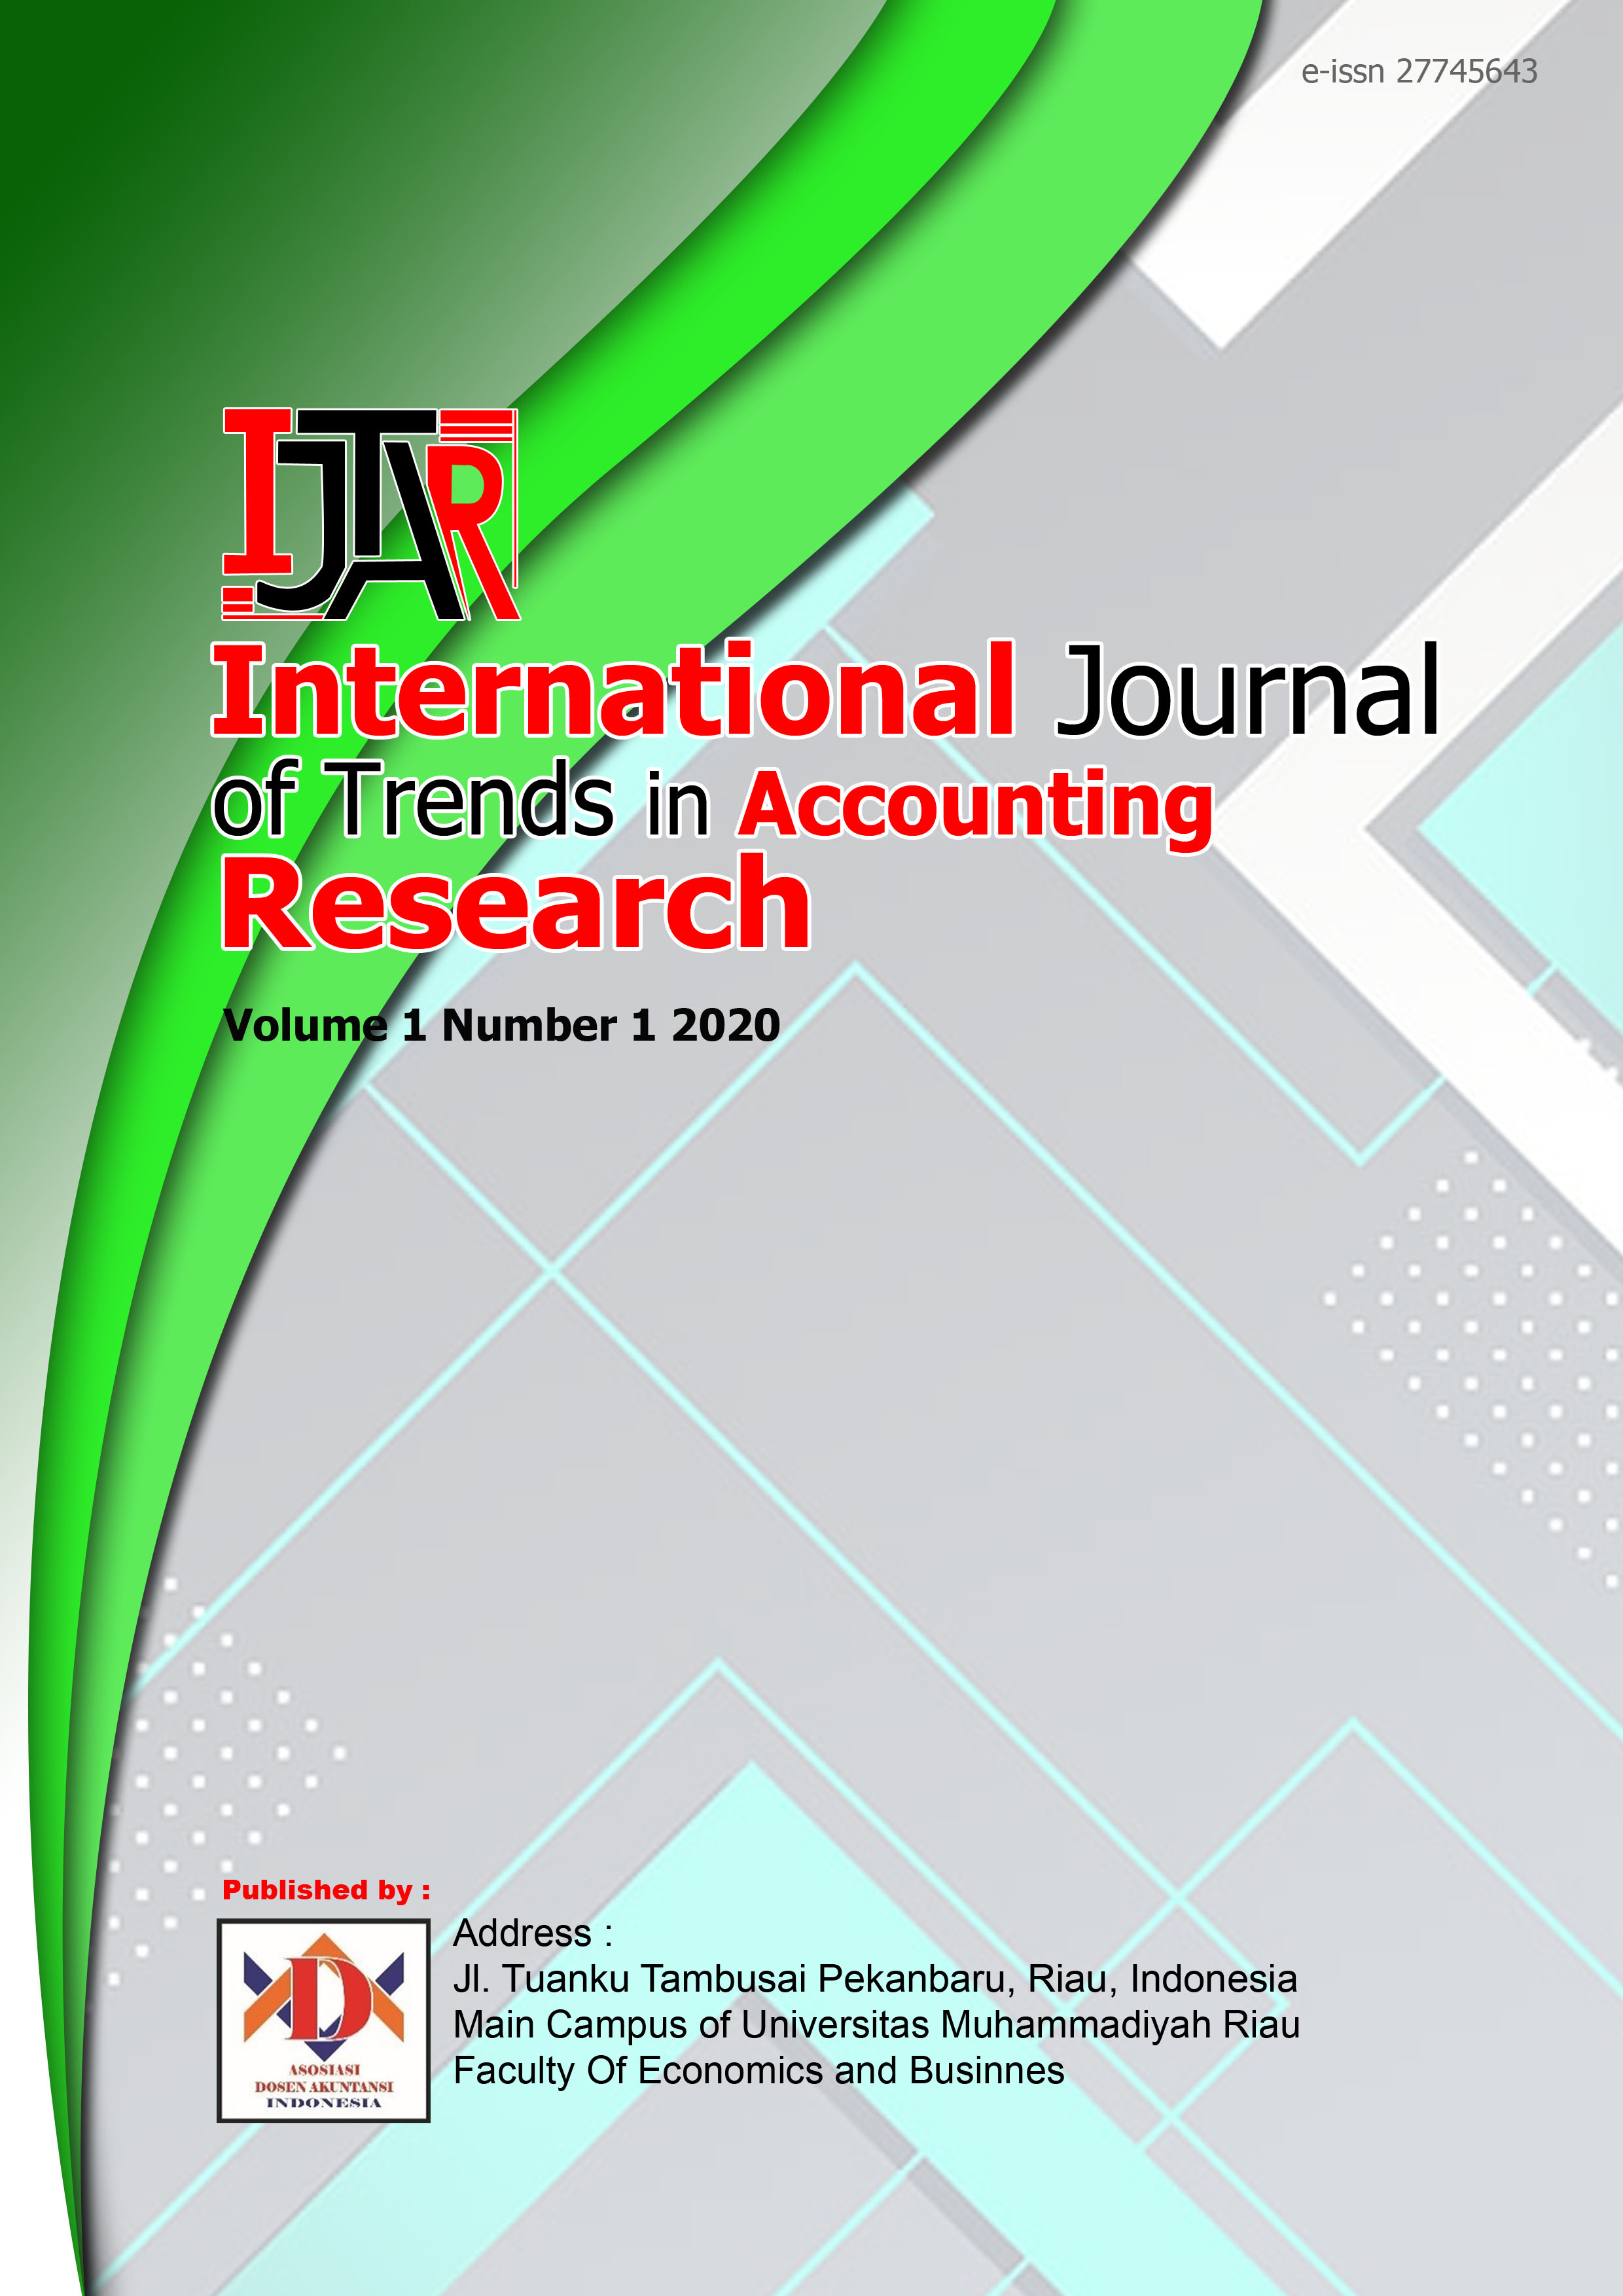 International Journal of Trends in Accounting Research